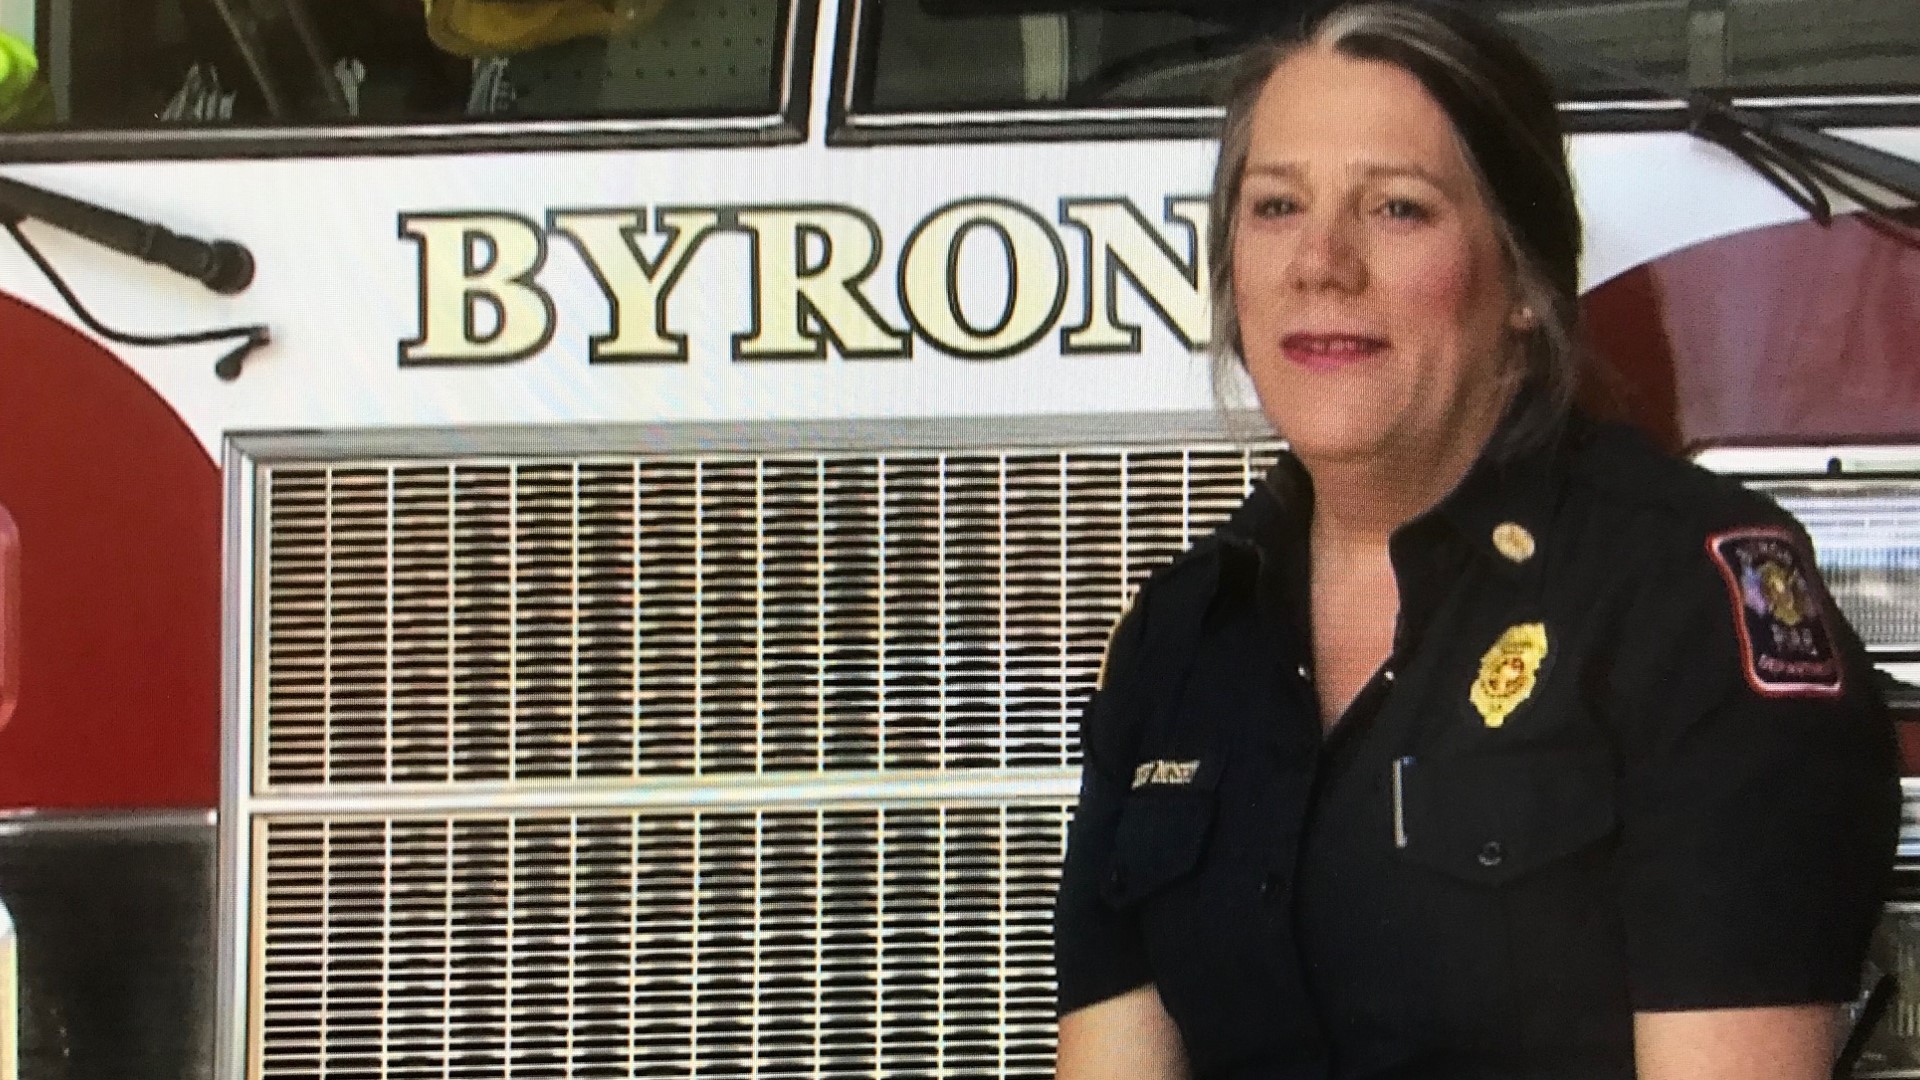 Rachel Mosby worked for the Byron Fire Department for over a decade before being terminated